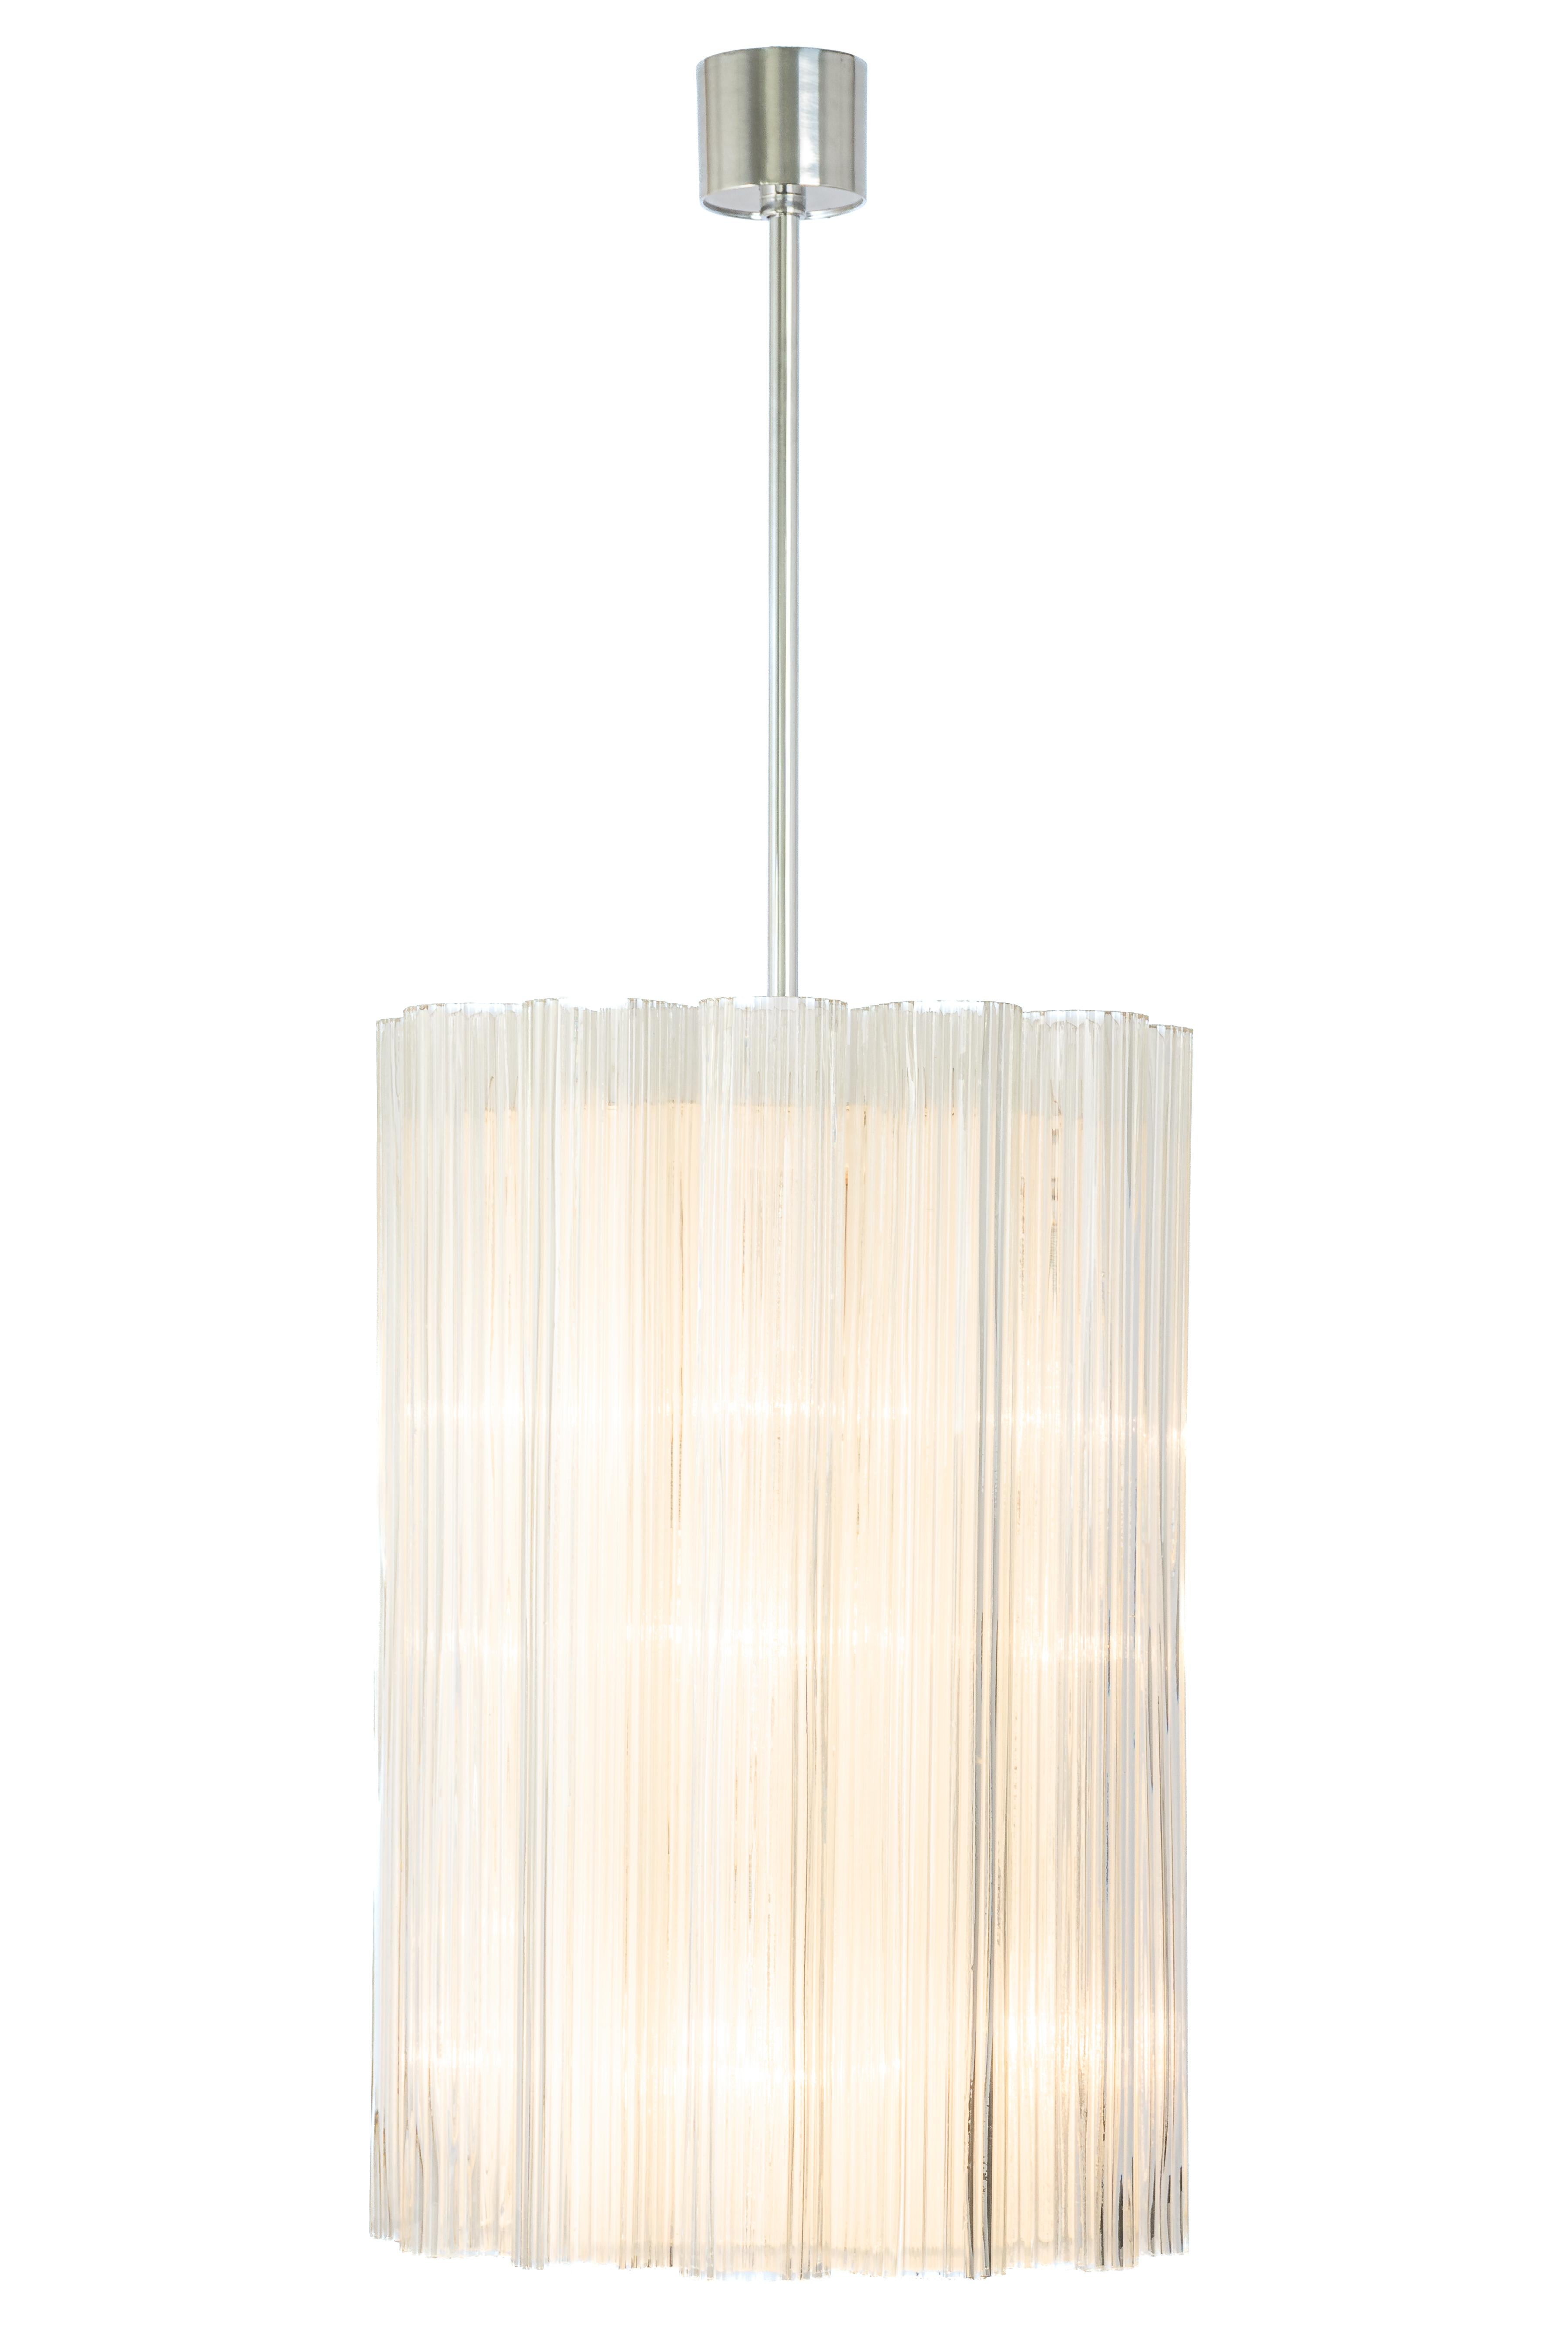 1 of 2 Cylindrical Pendant Fixture with Crystal Glass by Doria, Germany, 1960s For Sale 5